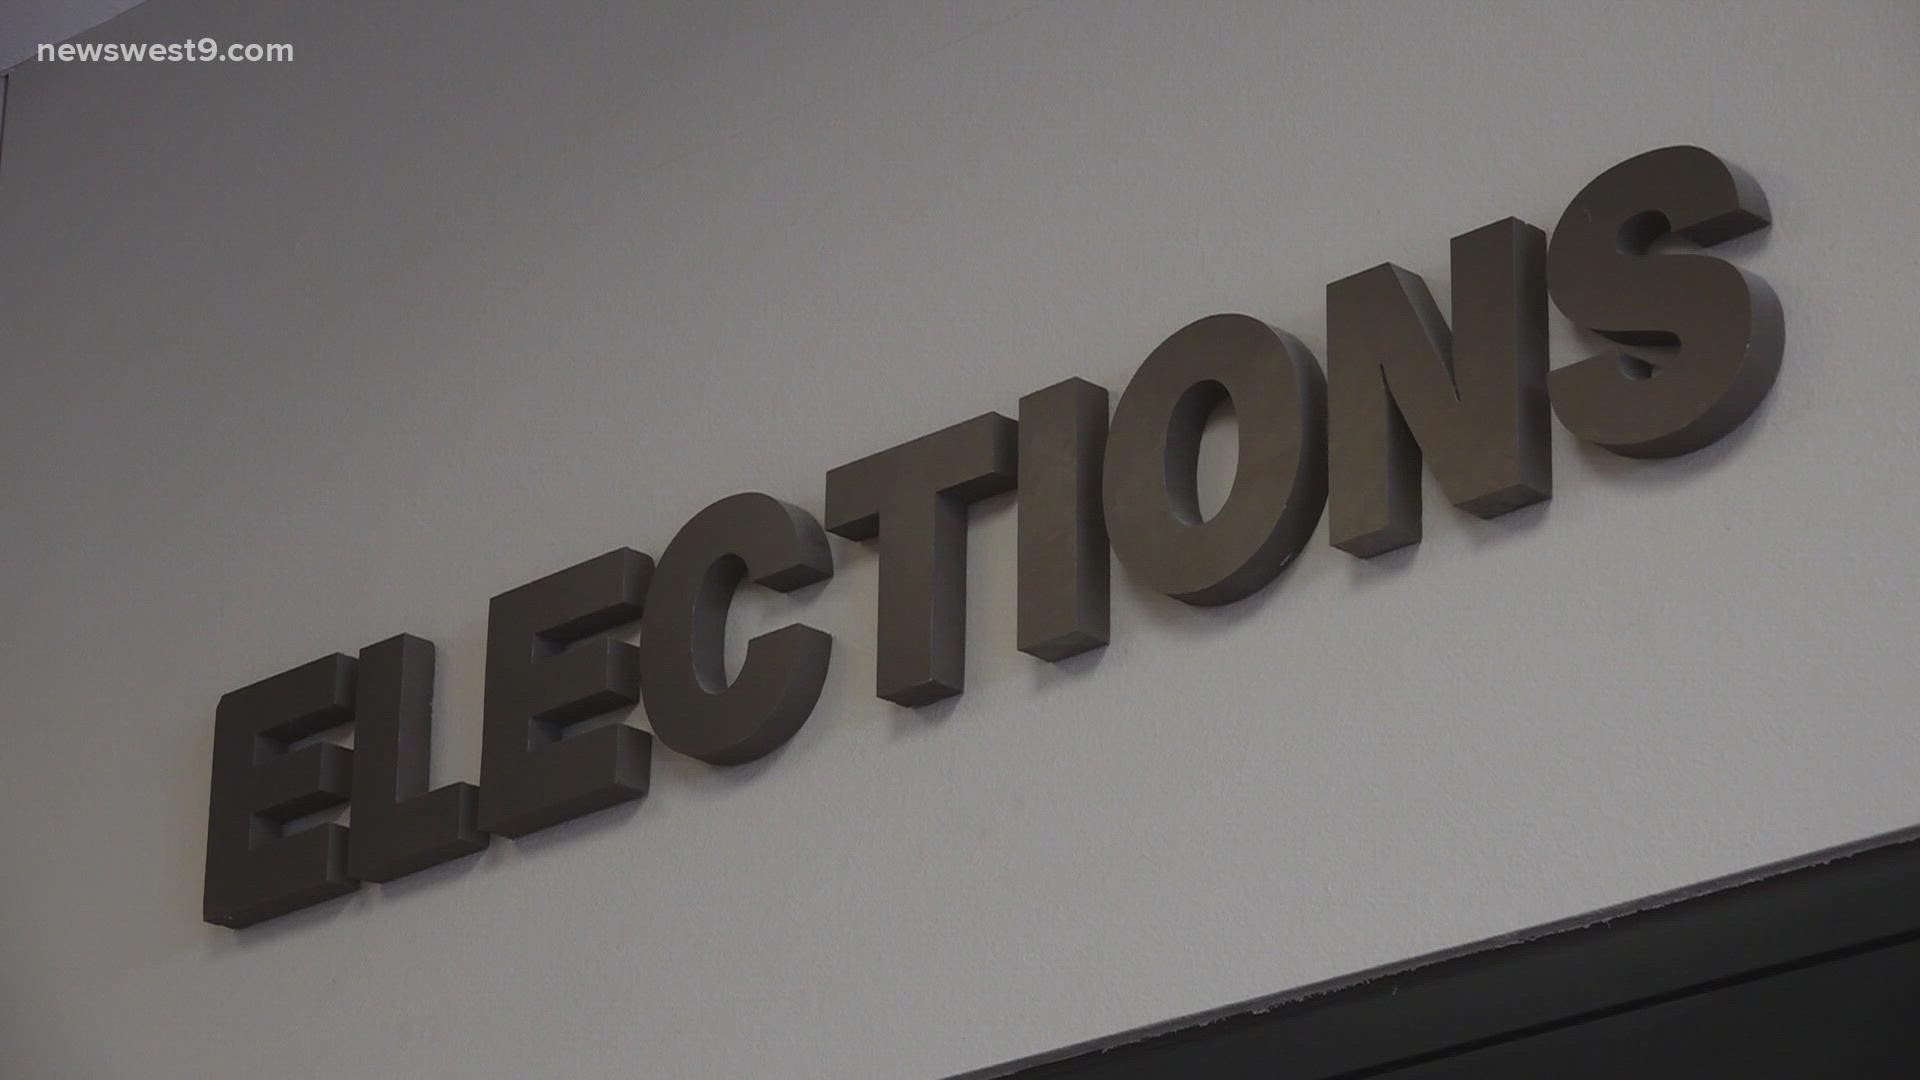 The office had to reject some mail-in ballots during the March primary election.